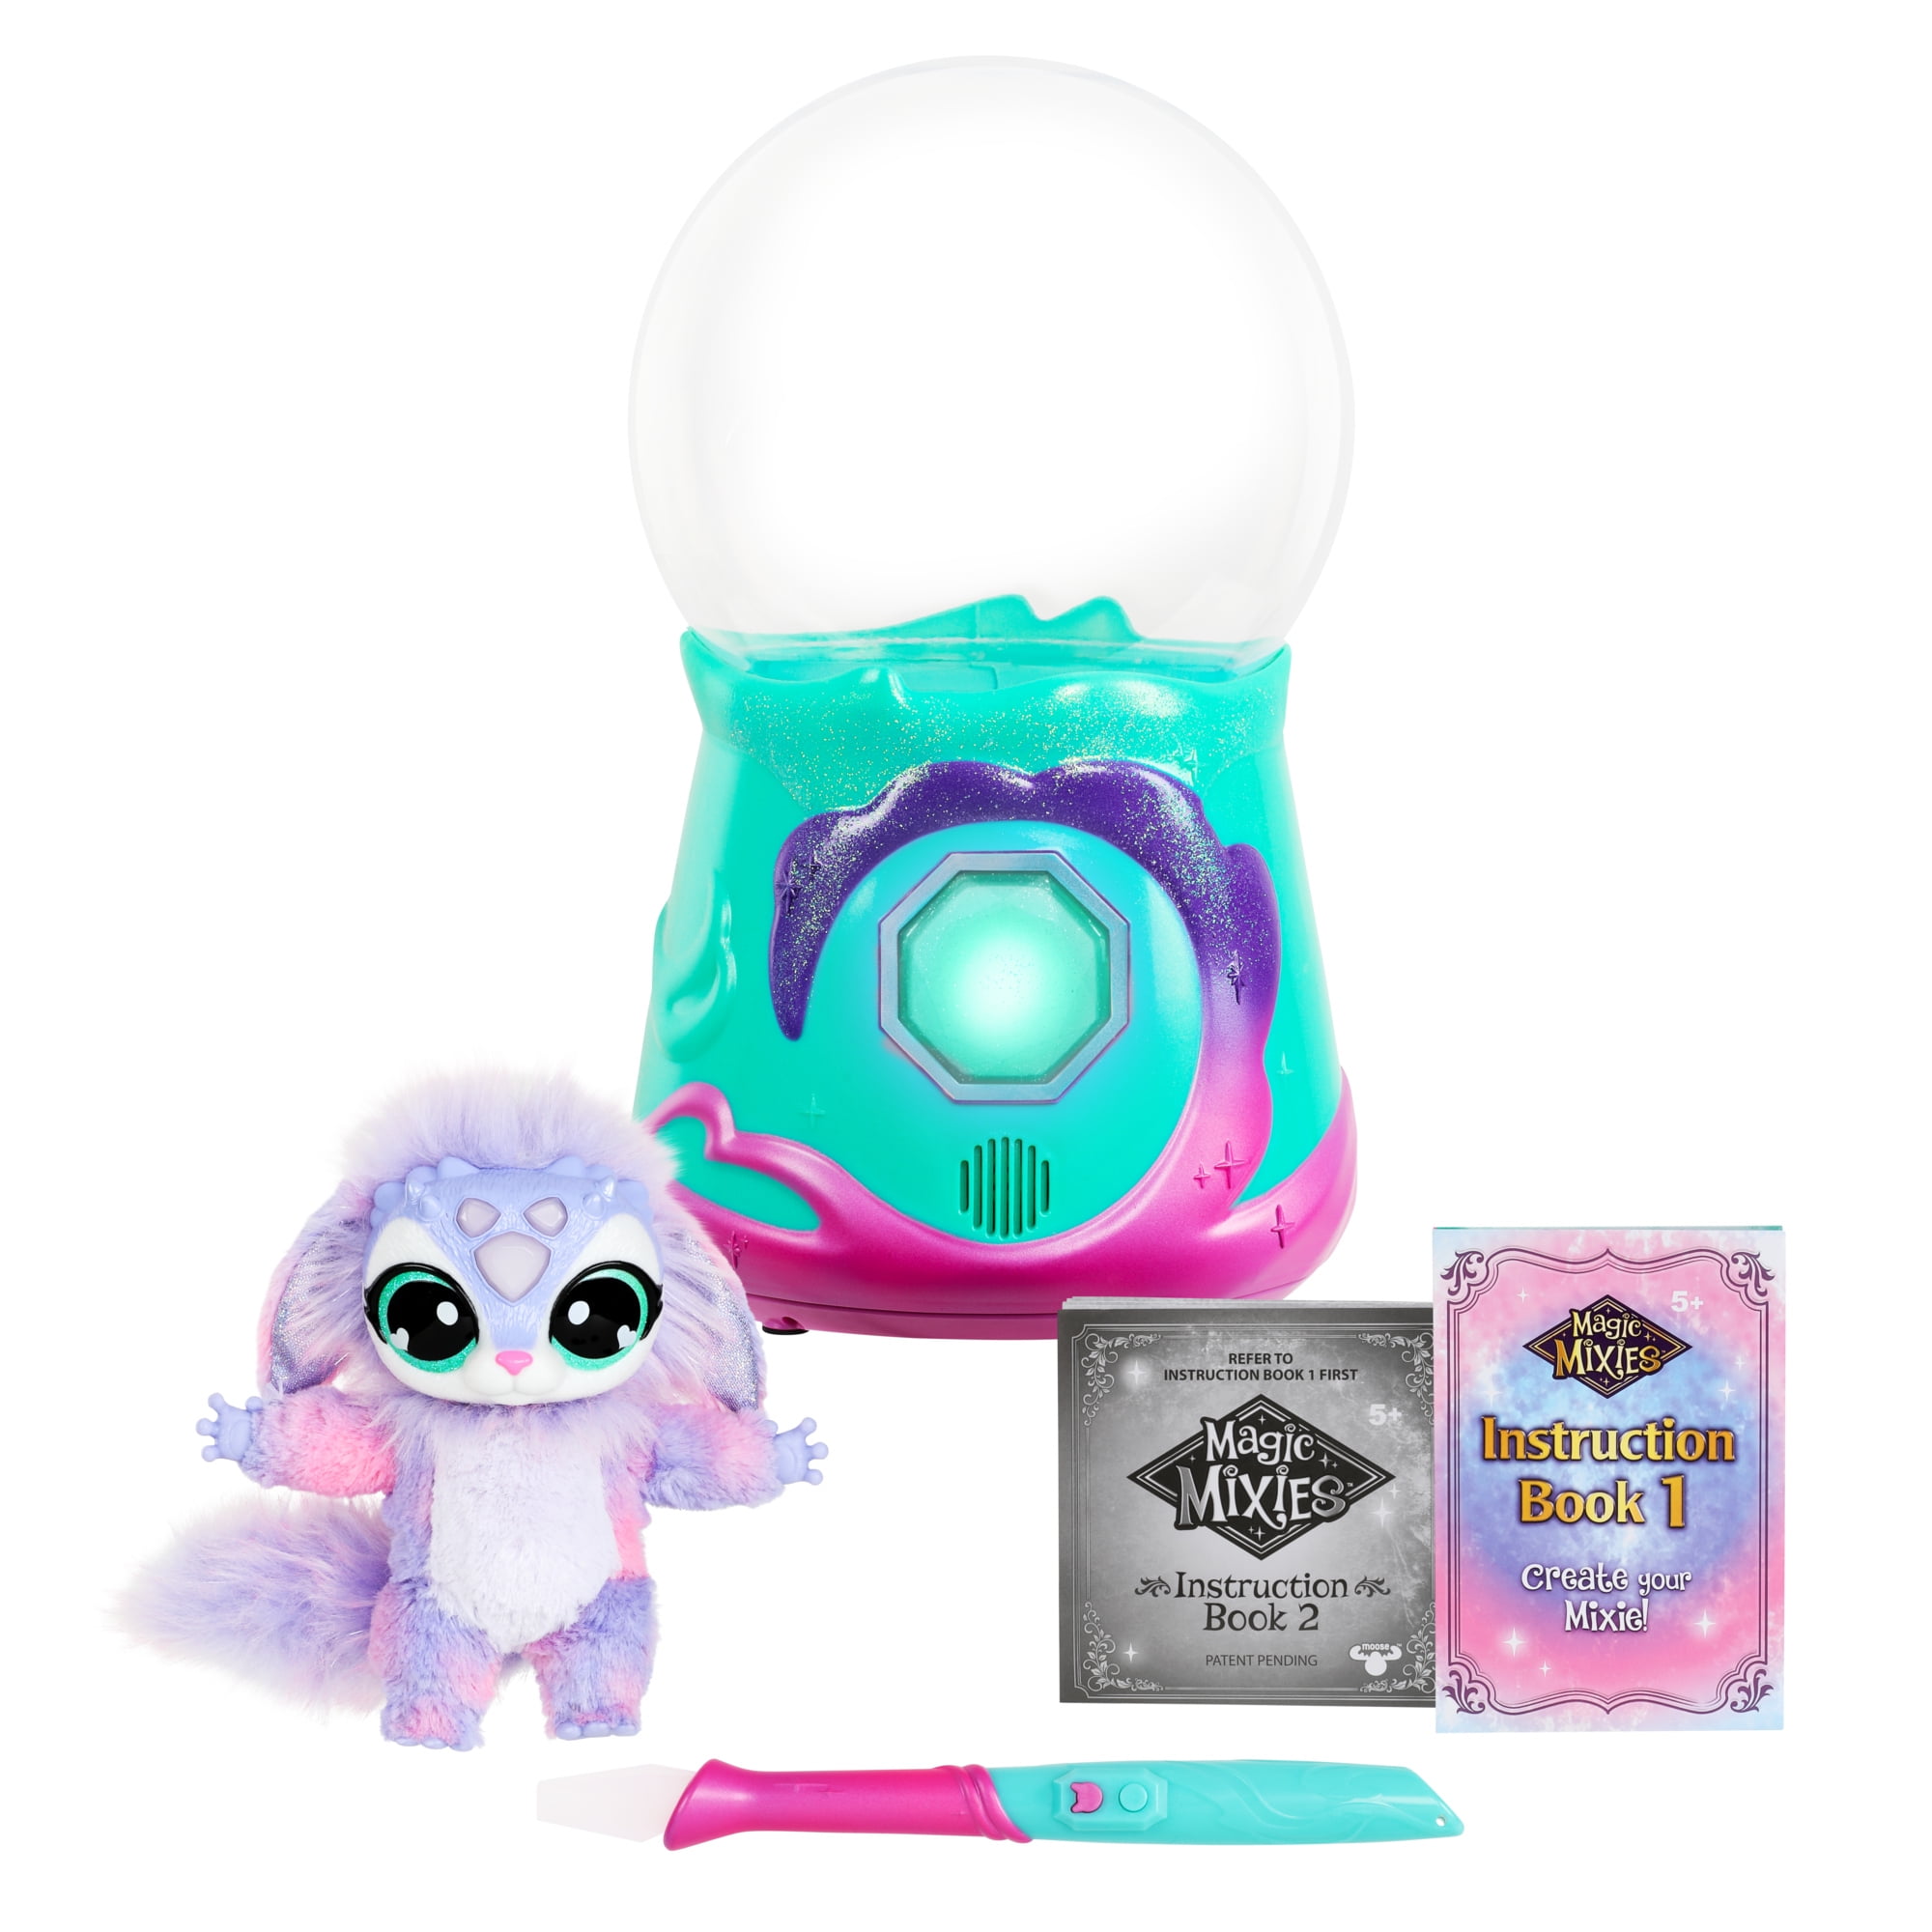 Magic mixies sparkle magic crystal ball with exclusive interactive inch sparkle plush toy ages